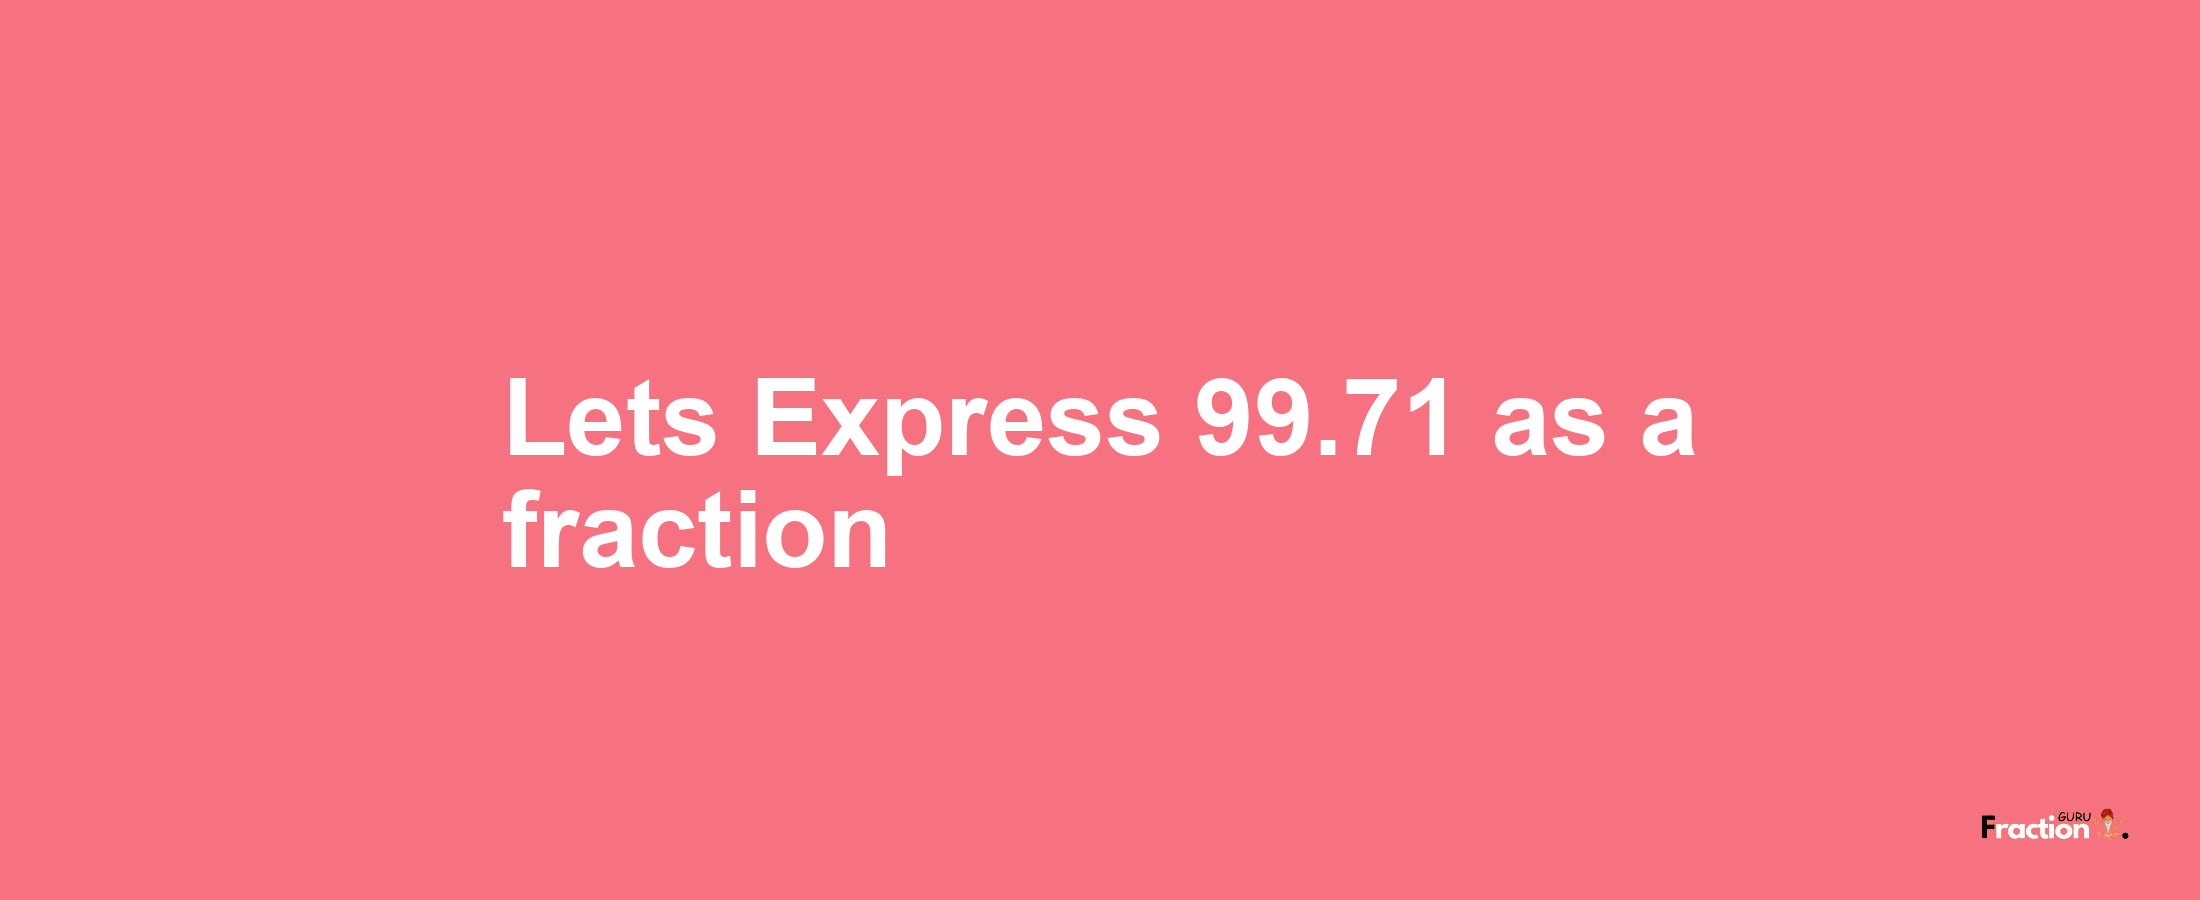 Lets Express 99.71 as afraction